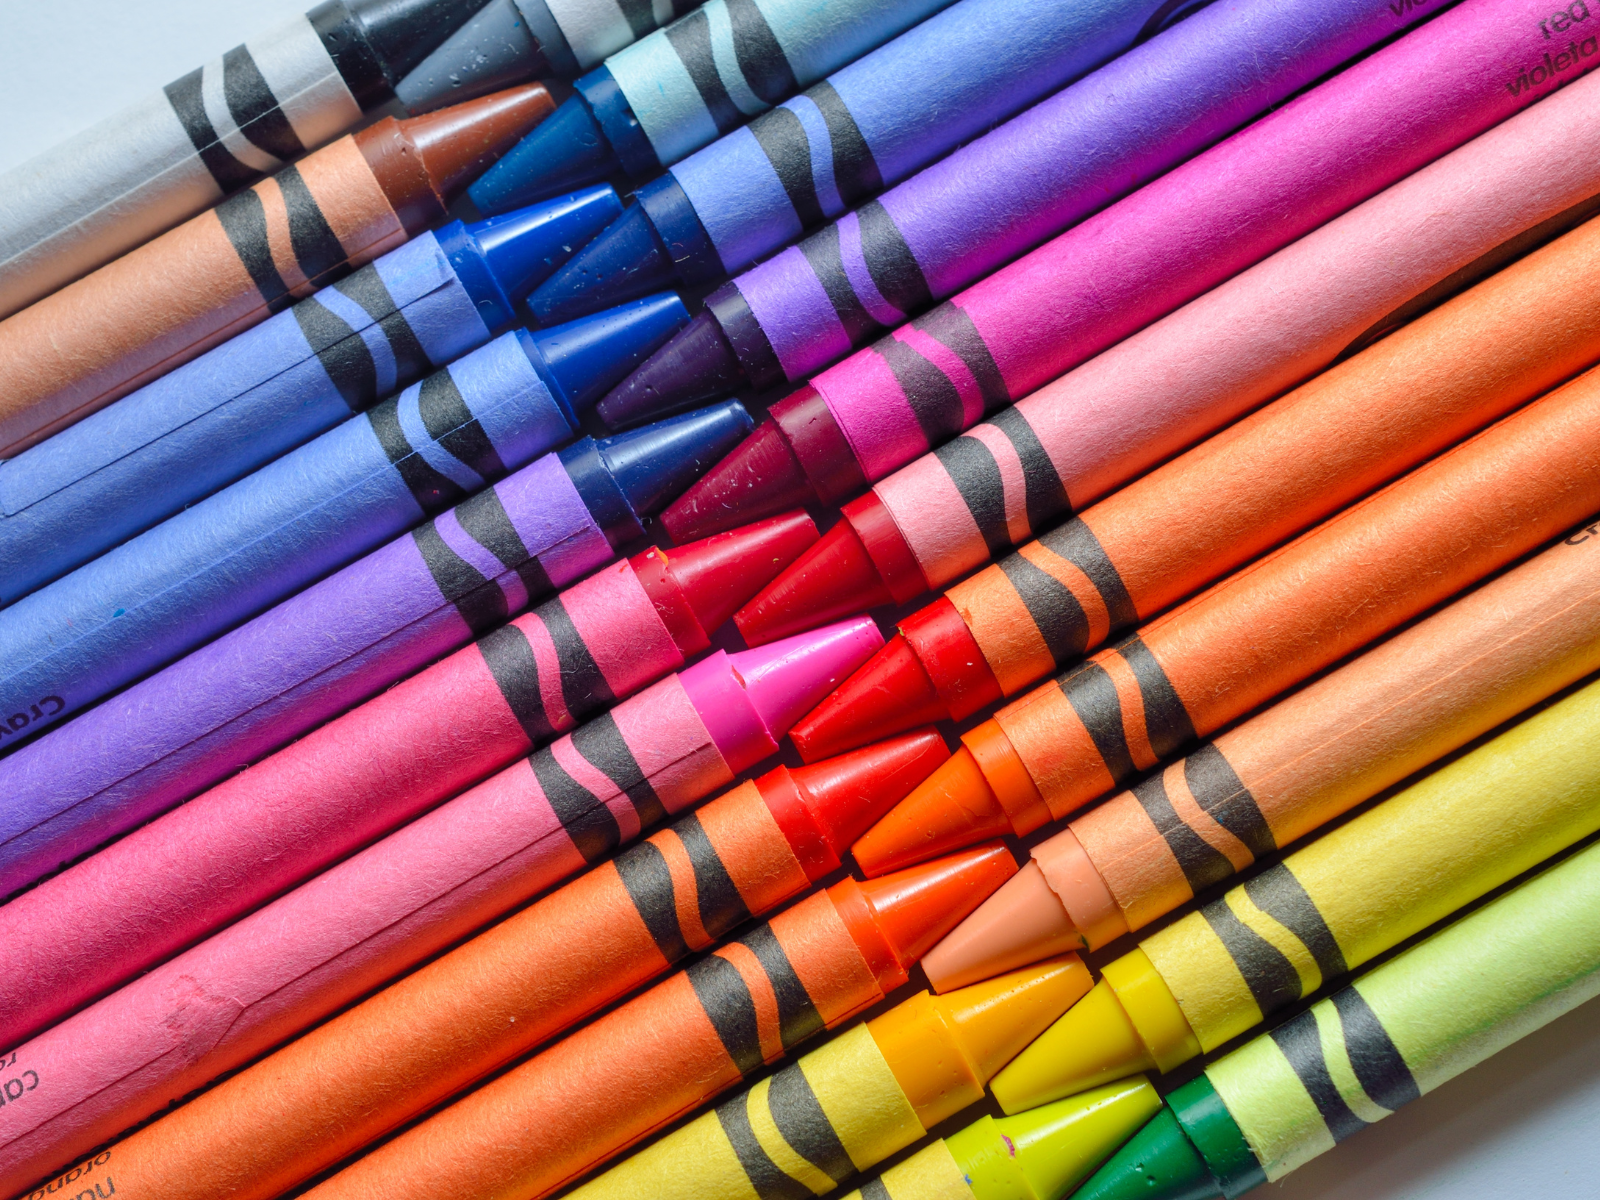 Which Crayon Brand is the Best? Unleash Your Creativity!